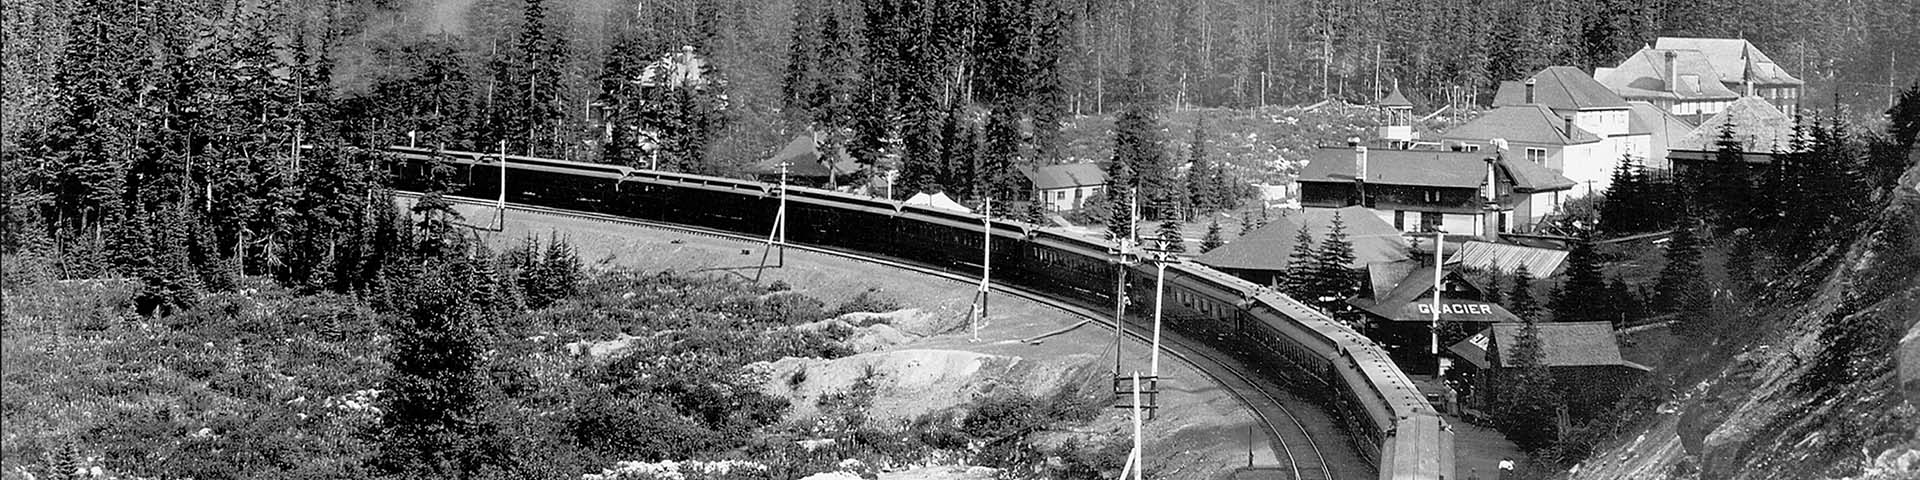 Black and white photo of a train passing through the old glacier house